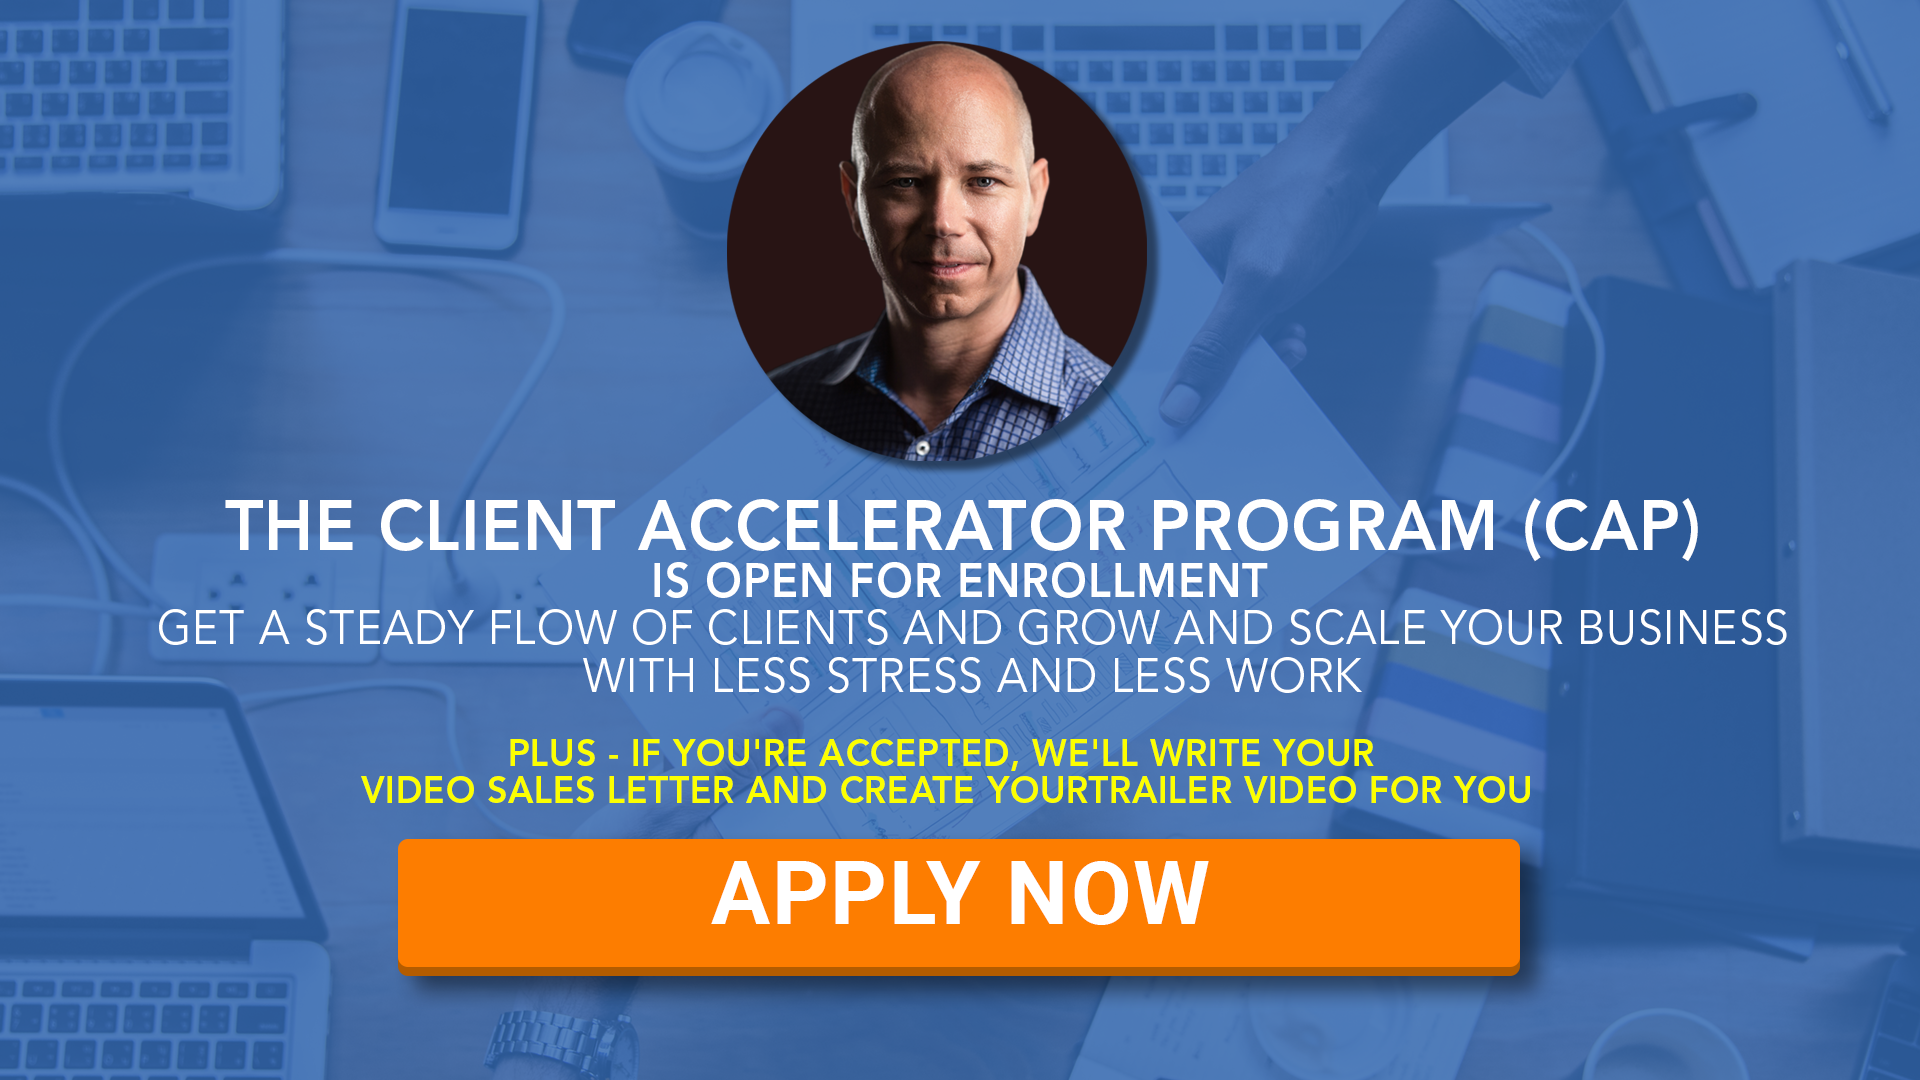 Apply Now for the Client Accelerator Program with Dan Kuschell